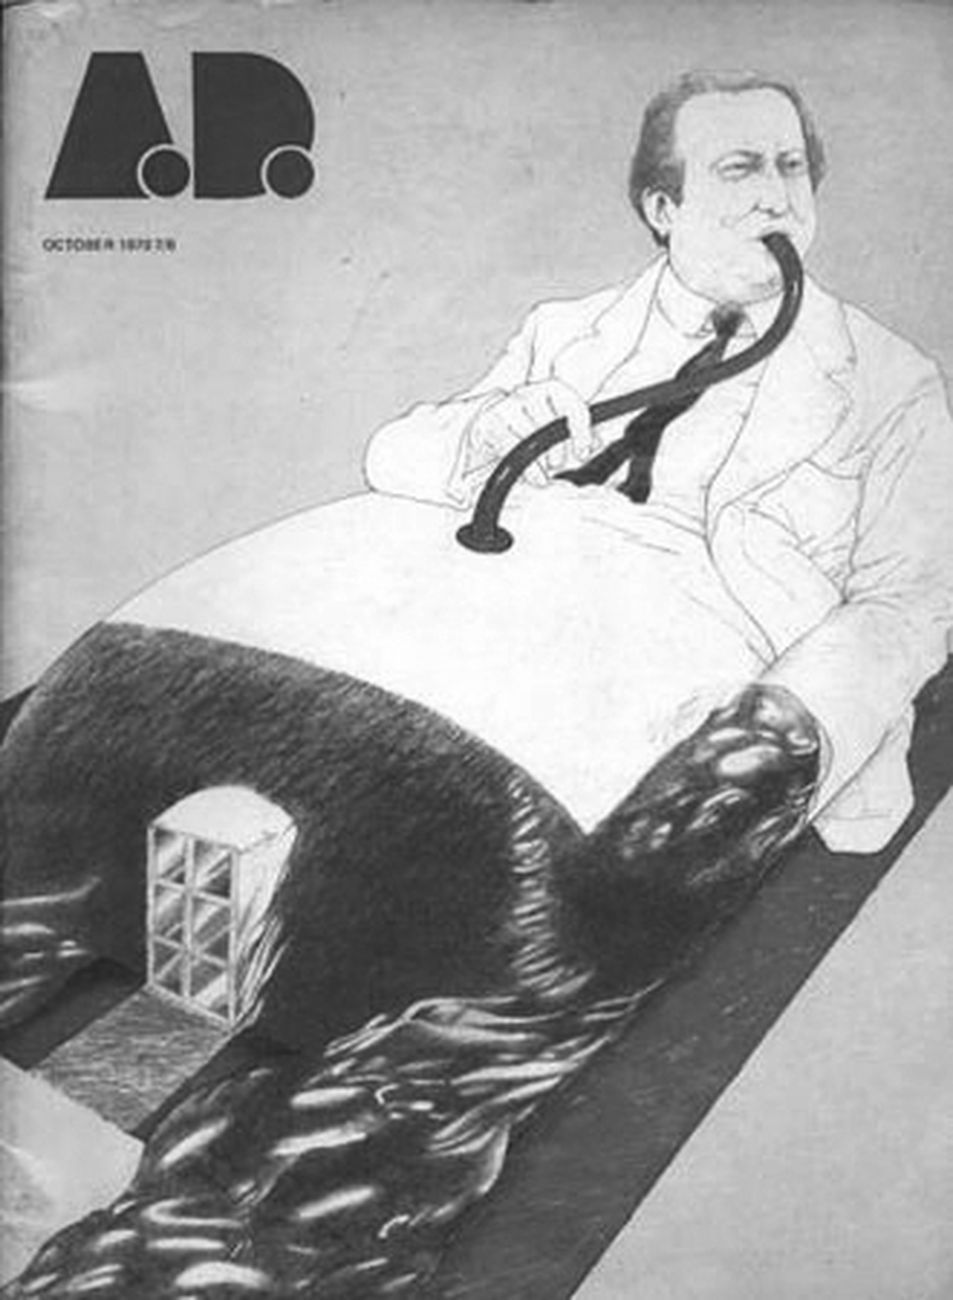 Cedric Price features on the cover of Architectural Design, October 1970